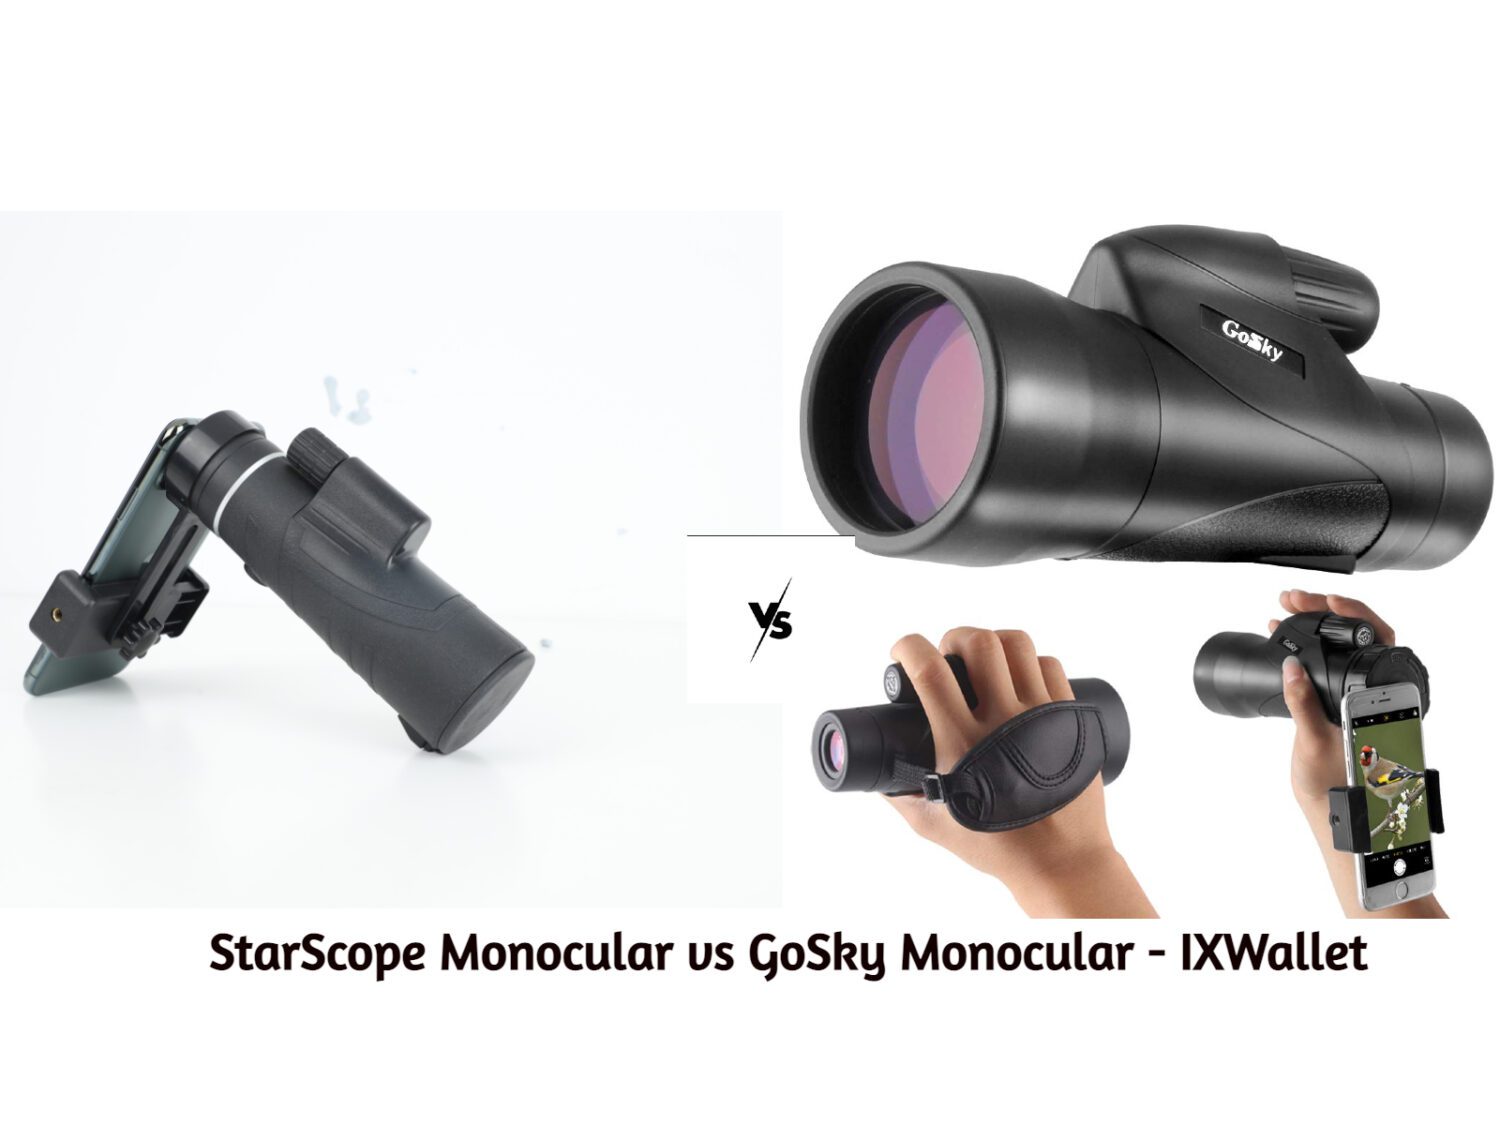 An image with difference between StarScope Monocular vs Gosky